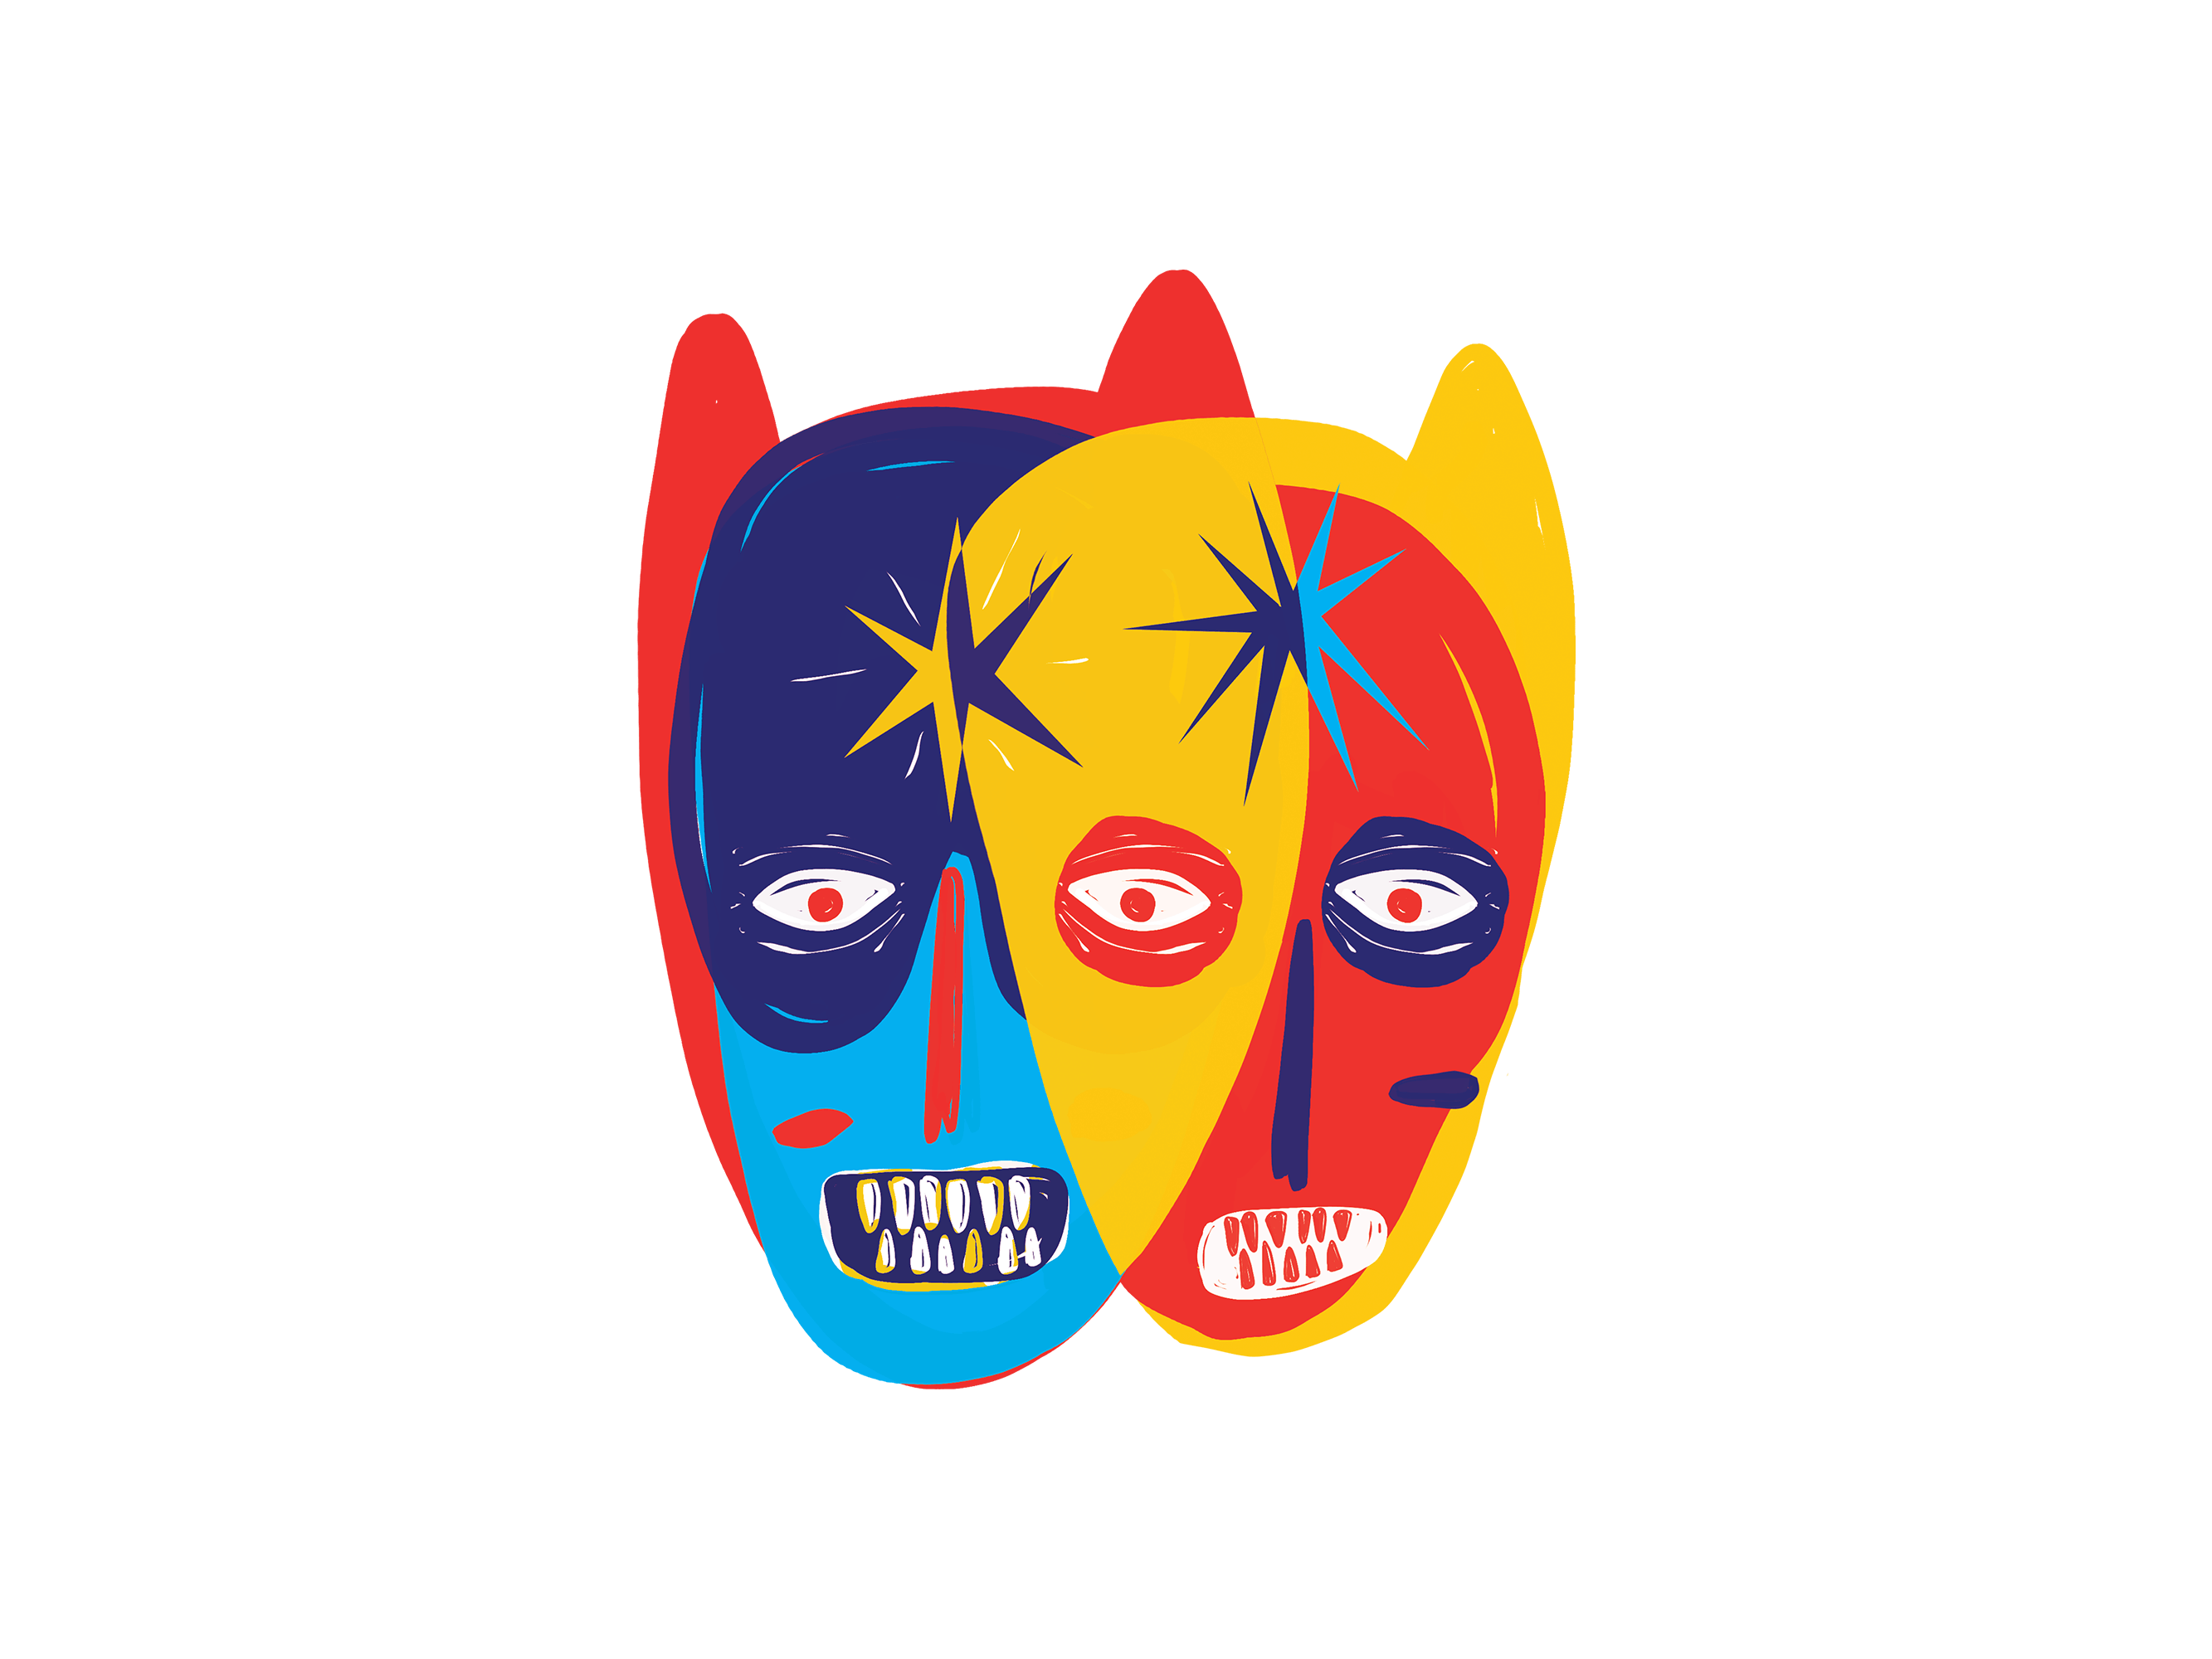 two masks lie on top of each other— one is yellow and red, one is blue and light blue.